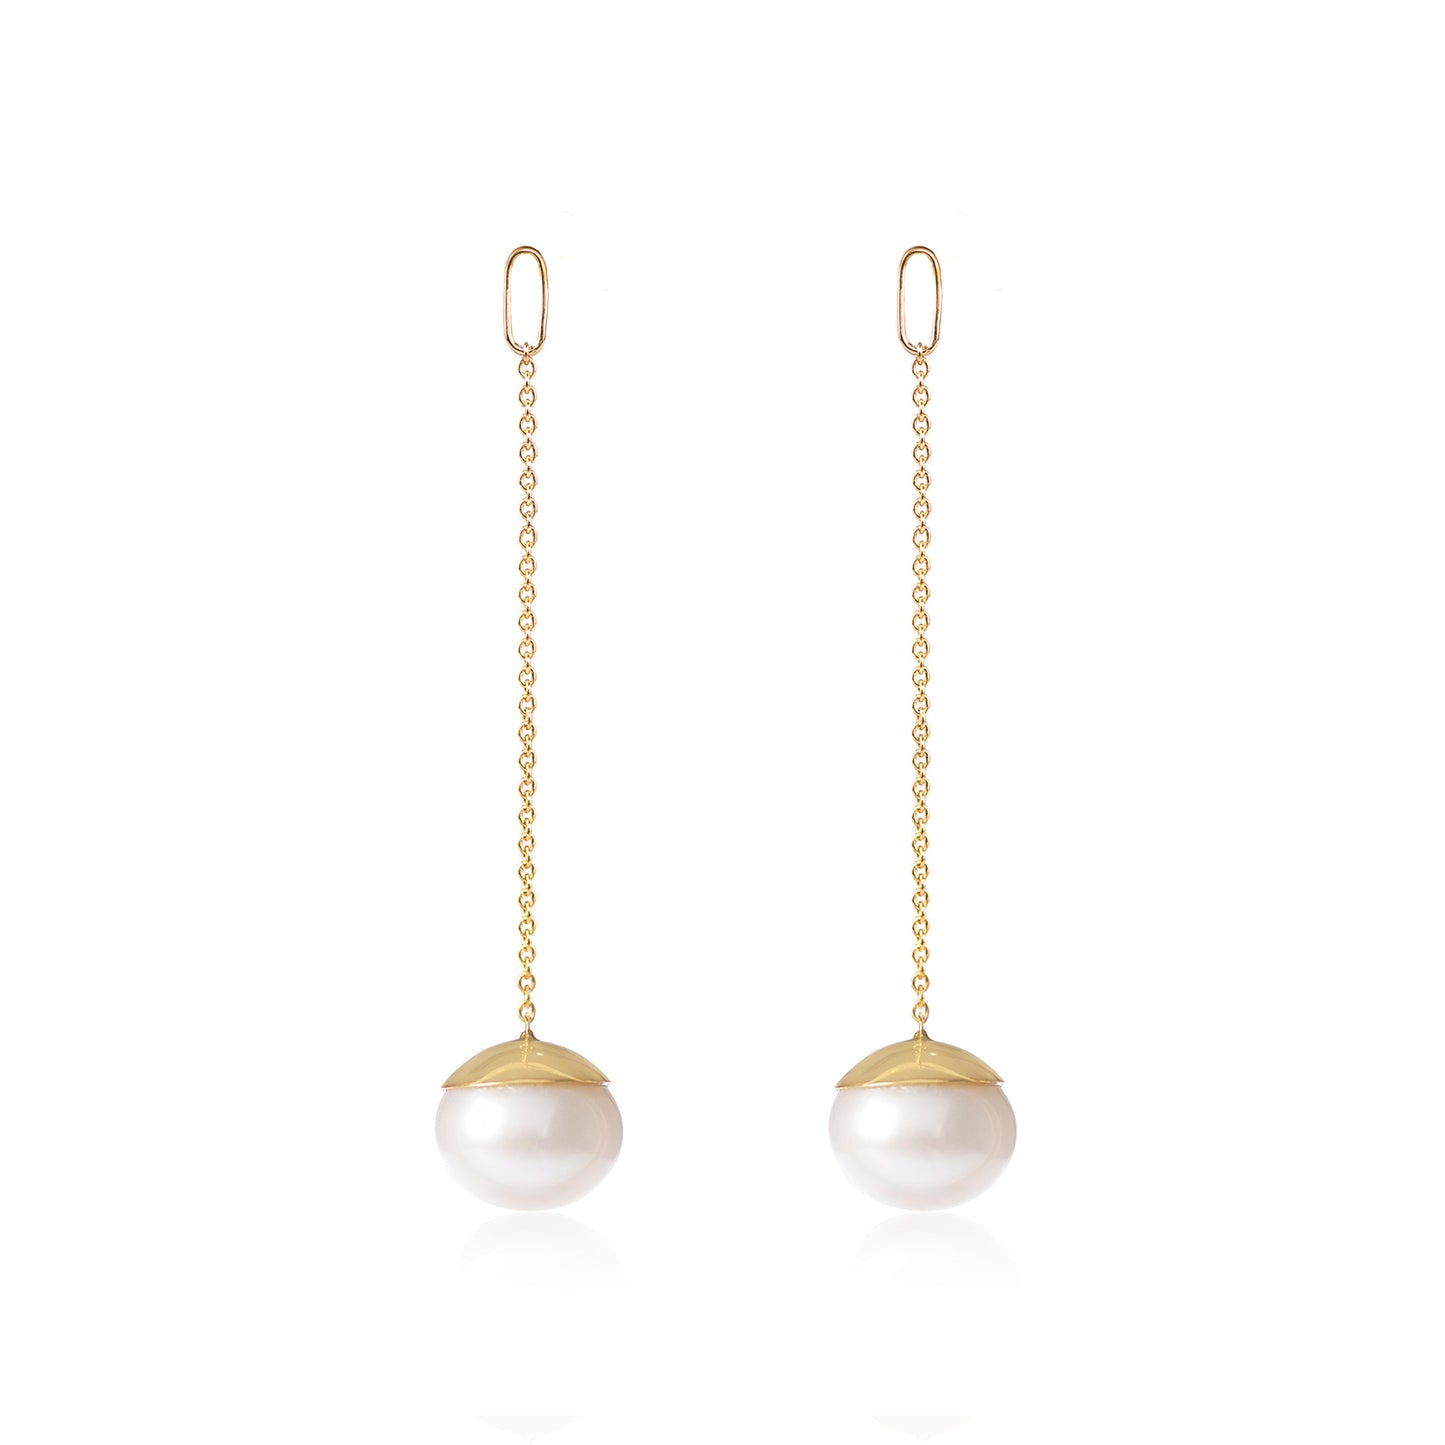 Long Chained Gold Capped White Cultured Pearl Earring Pendants by McFarlane Fine Jewellery